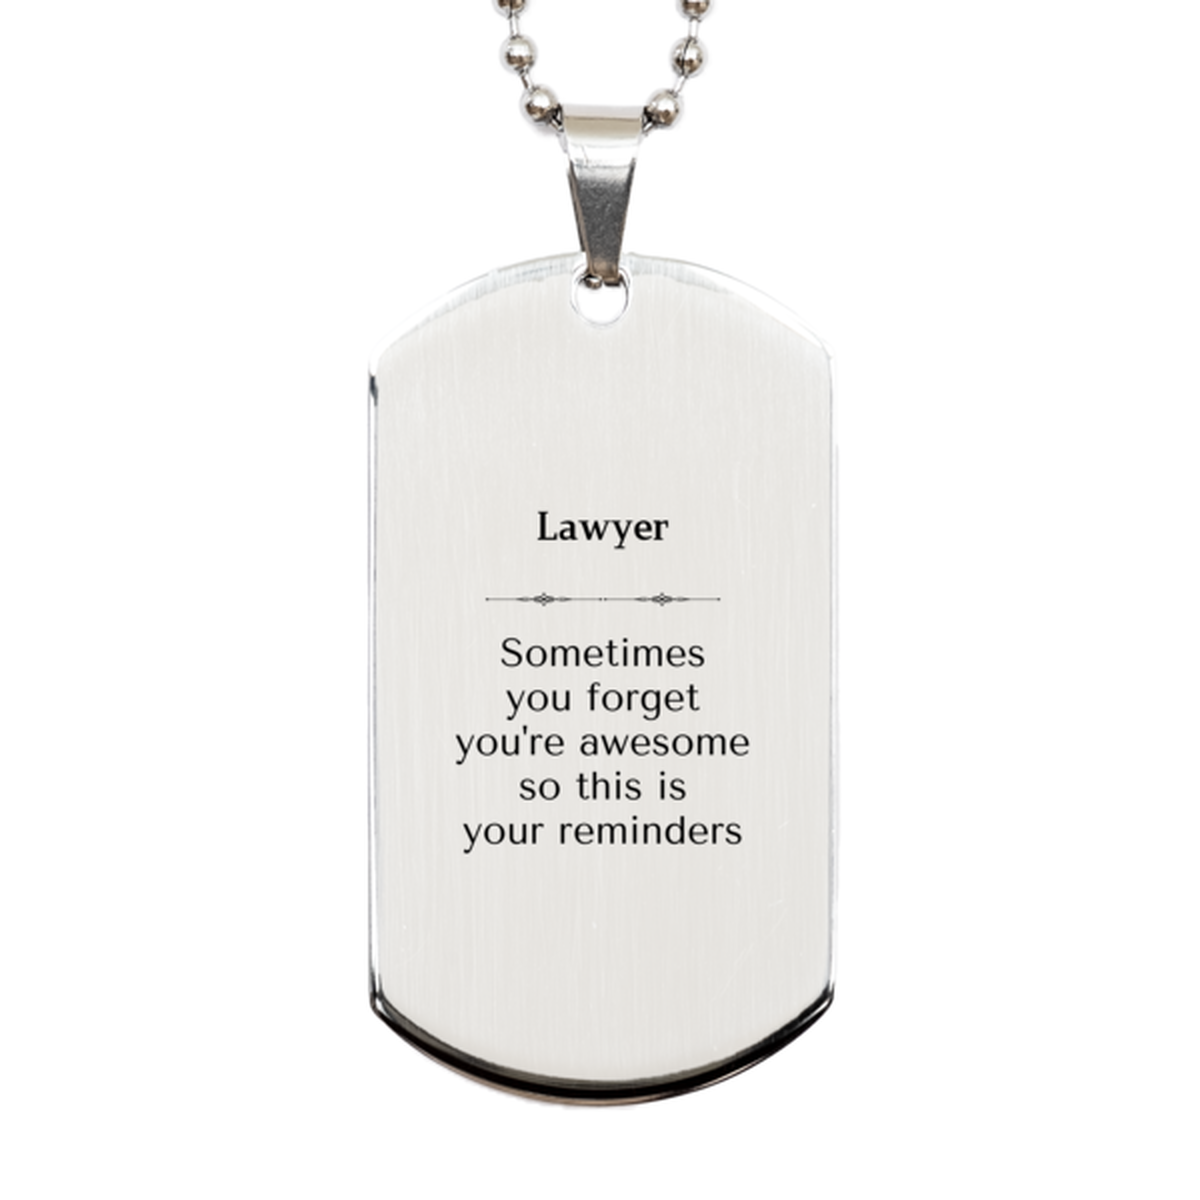 Sentimental Lawyer Silver Dog Tag, Lawyer Sometimes you forget you're awesome so this is your reminders, Graduation Christmas Birthday Gifts for Lawyer, Men, Women, Coworkers